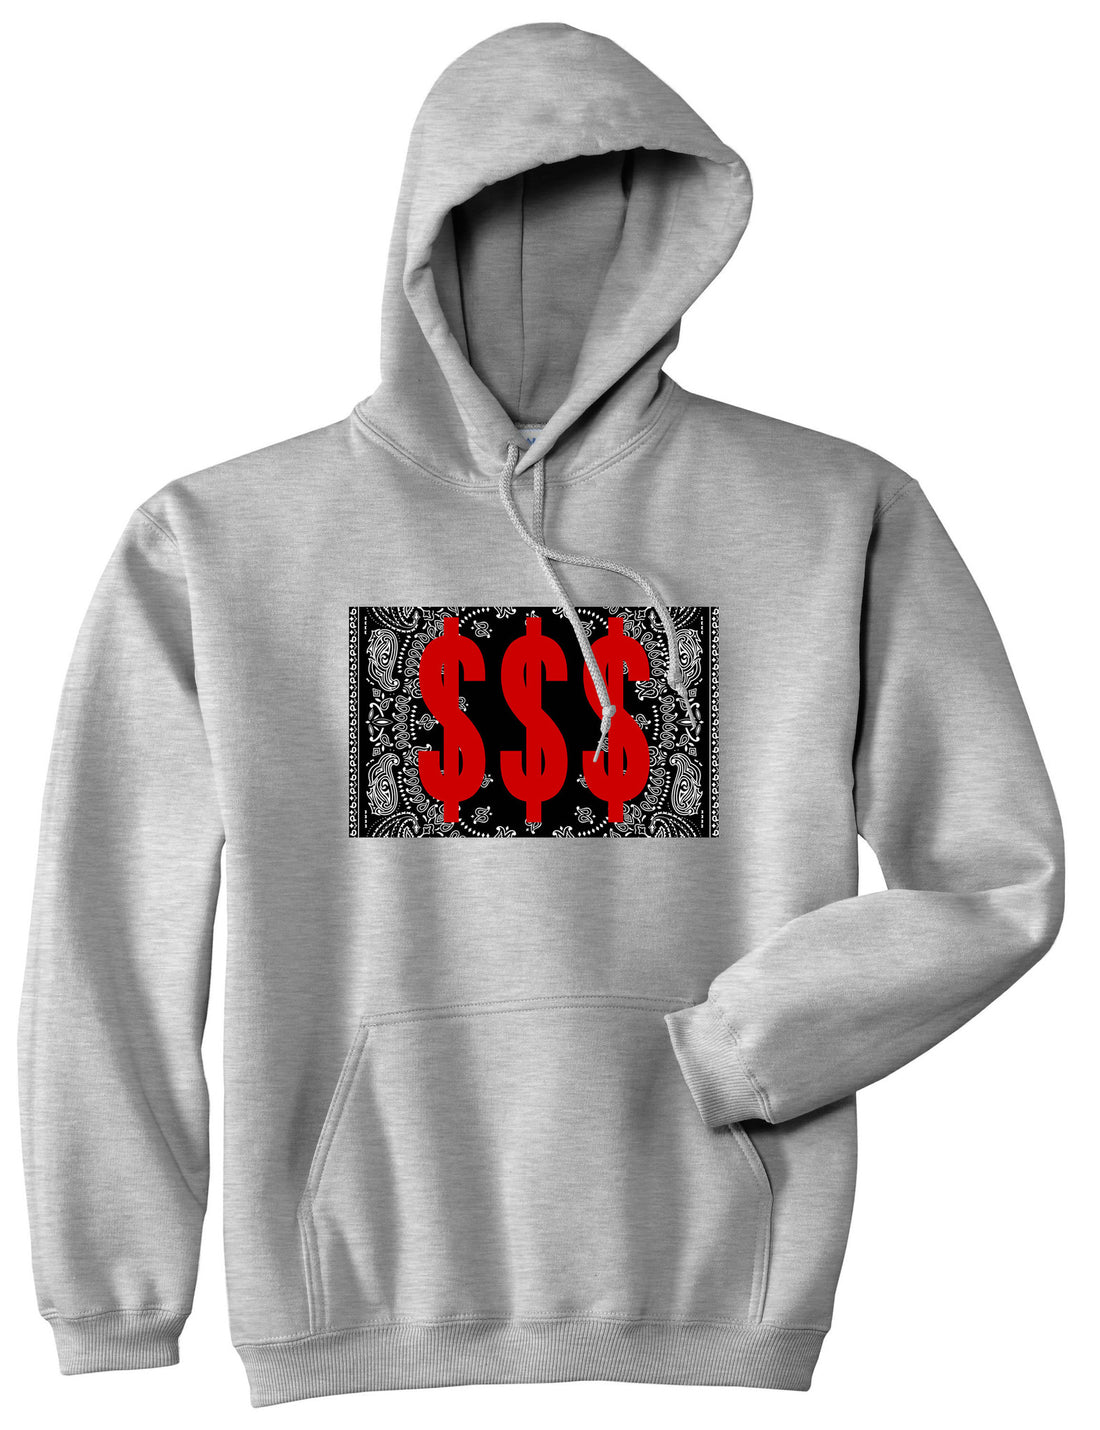 Money Bandana Gang Pullover Hoodie in Grey By Kings Of NY